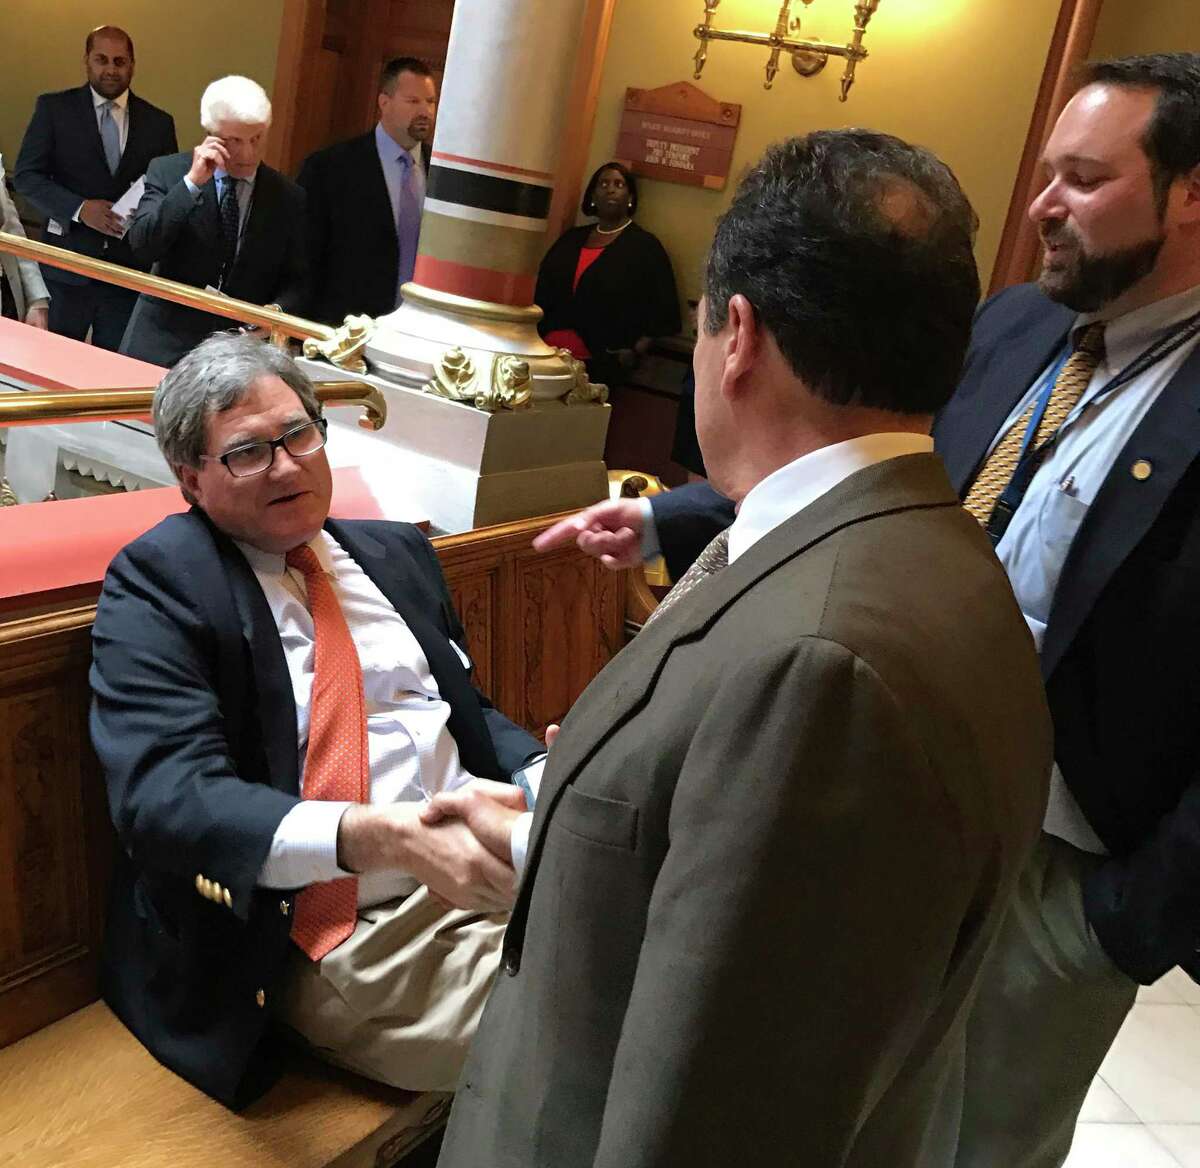 Former state GOP Chairman Chris Healy, seated, shook hands with Bridgeport Mayor Joe Ganim at the State Capitol in May, 2017.